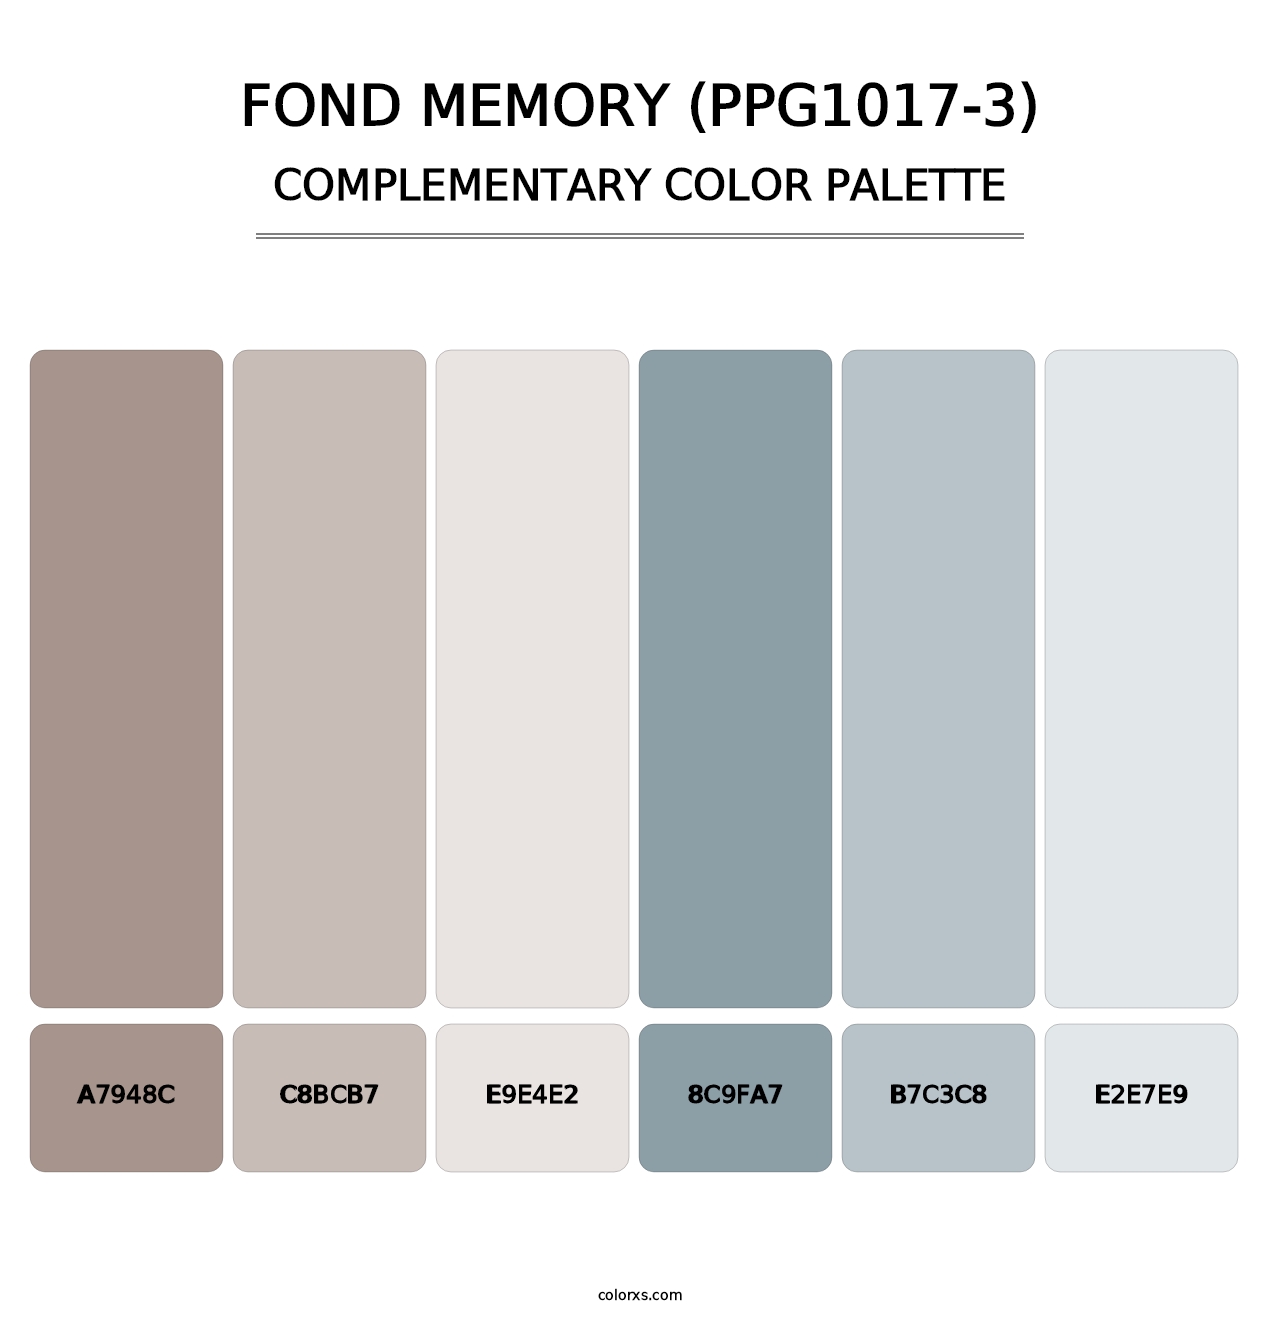 Fond Memory (PPG1017-3) - Complementary Color Palette